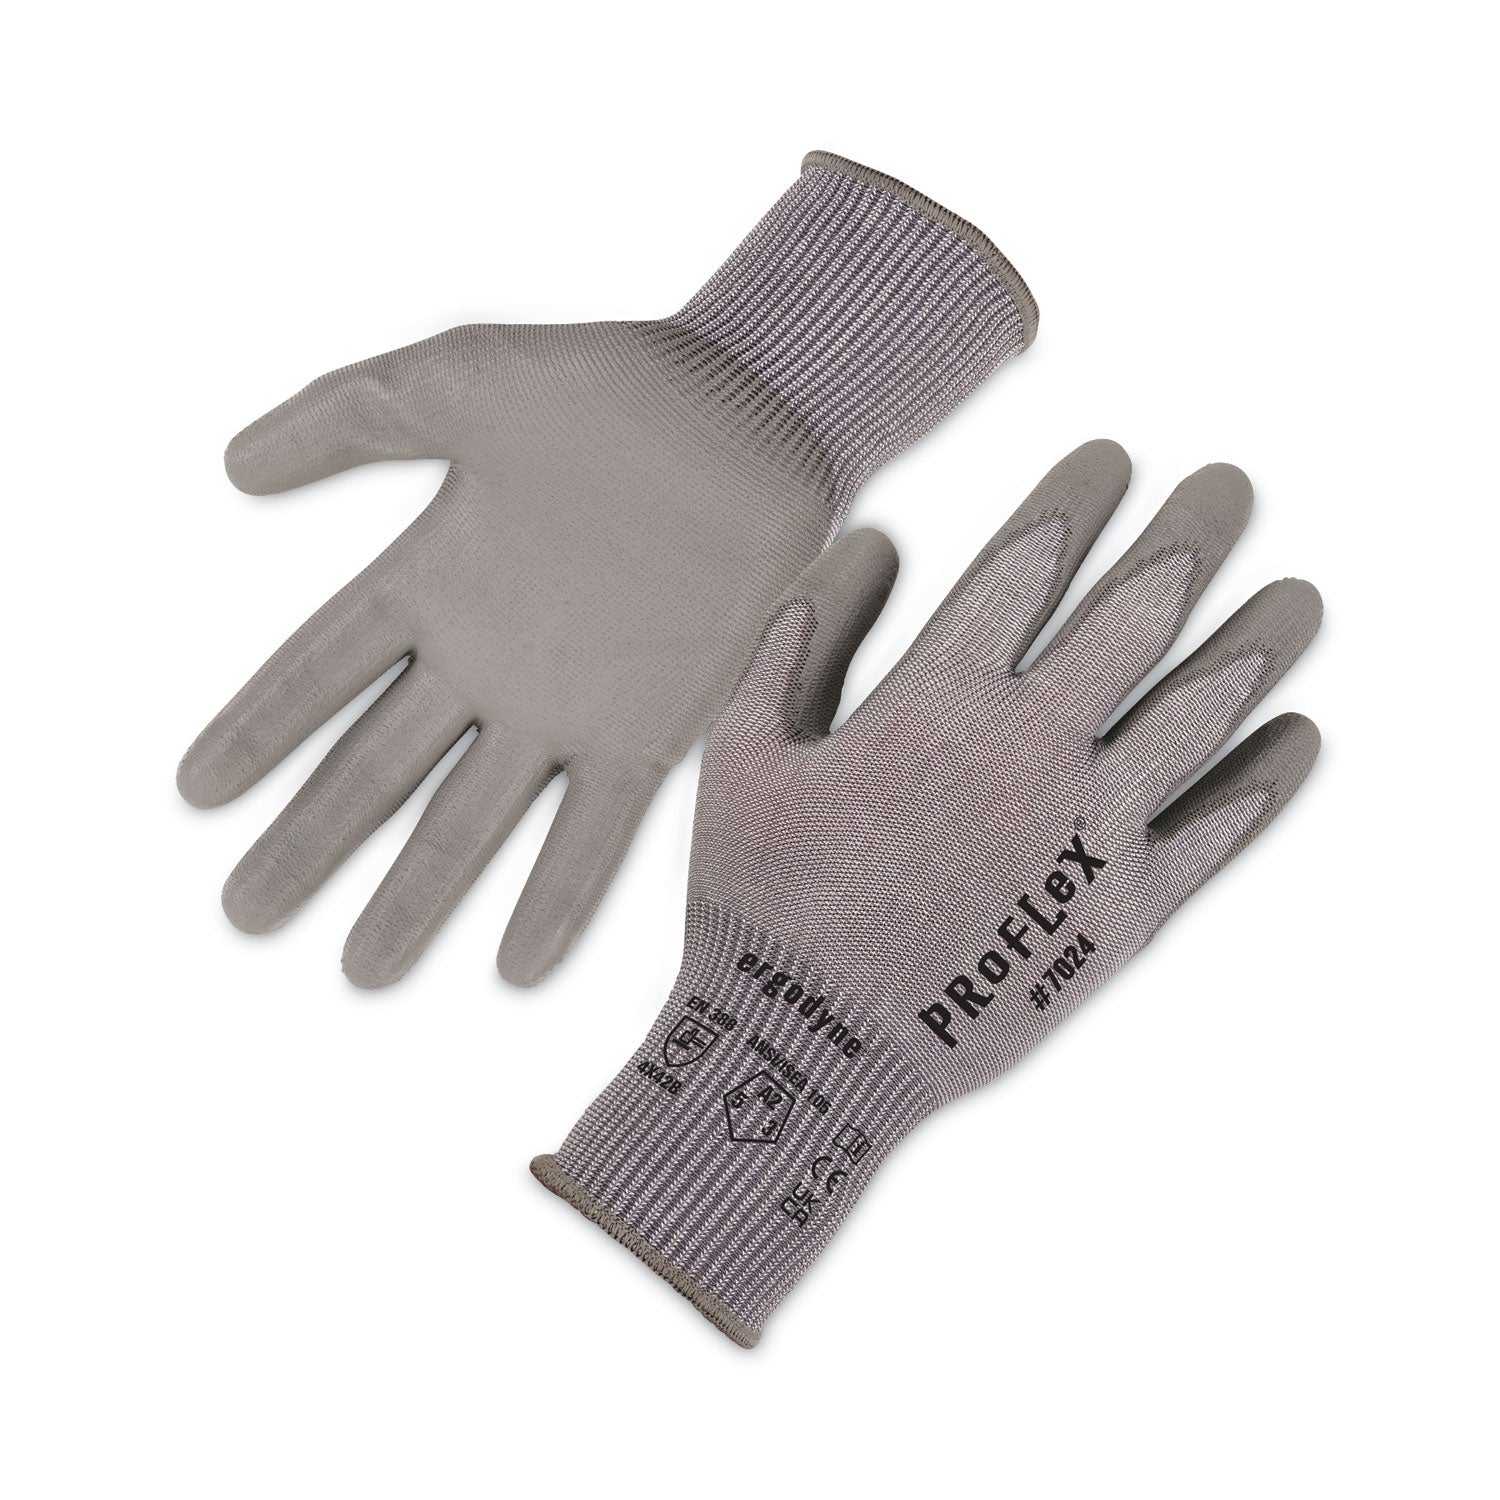 proflex-7024-ansi-a2-pu-coated-cr-gloves-gray-x-large-12-pairs-pack-ships-in-1-3-business-days_ego10395 - 1